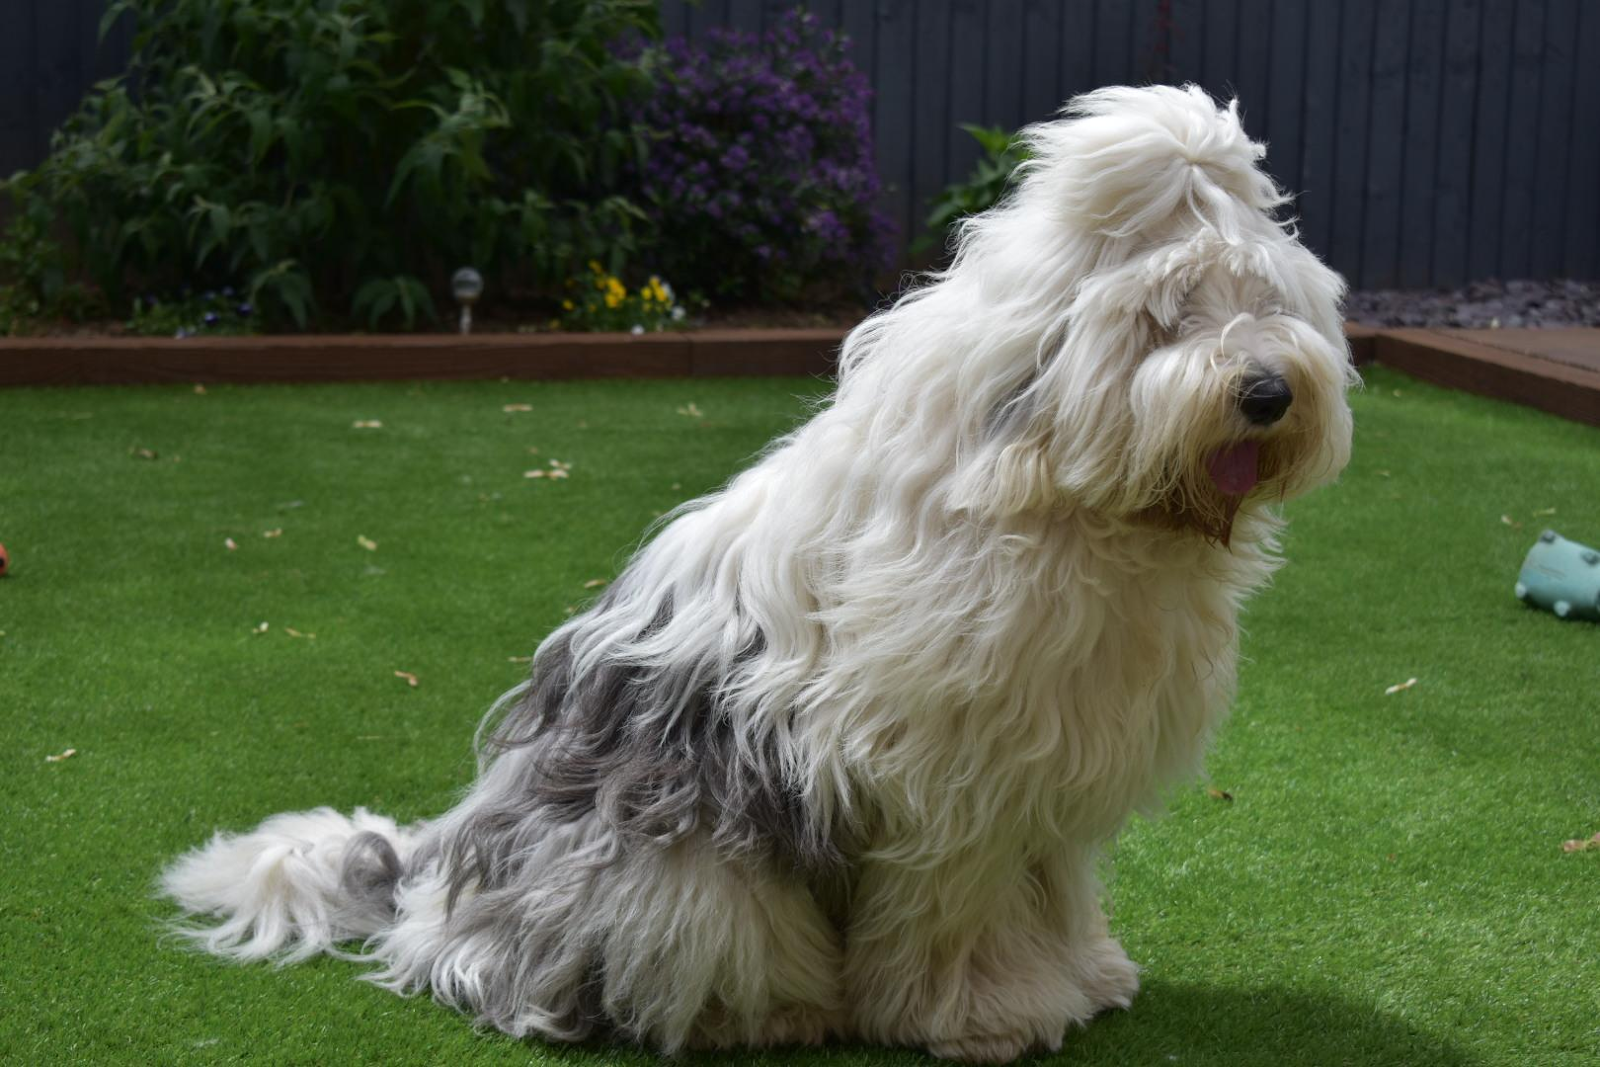 A large, grey and white dog with long hair and a ponytail is sitting in a garden